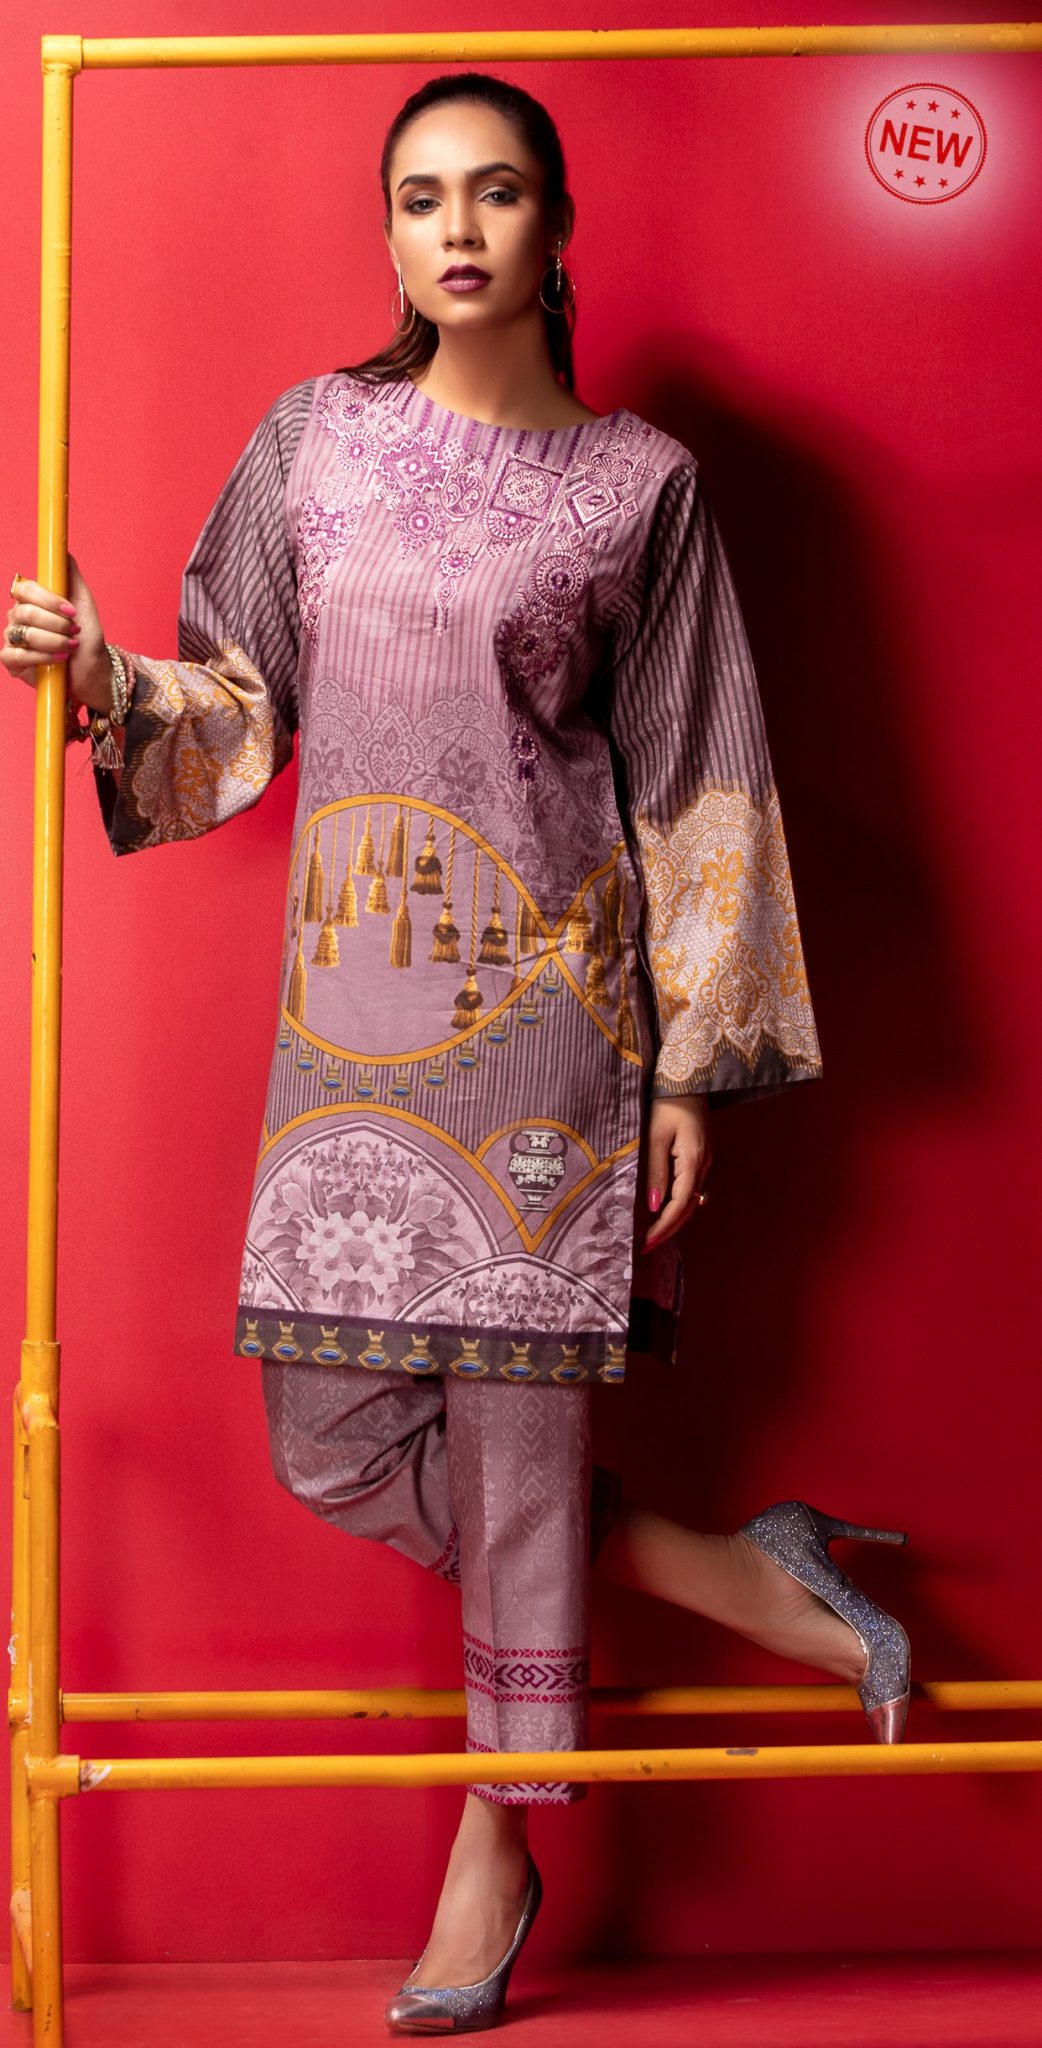 /2019/06/salitex-stitched-digital-printed-embroidered-lawn-kurta-with-embellishments-1pc-casual-pret-cp-09-image1.jpeg